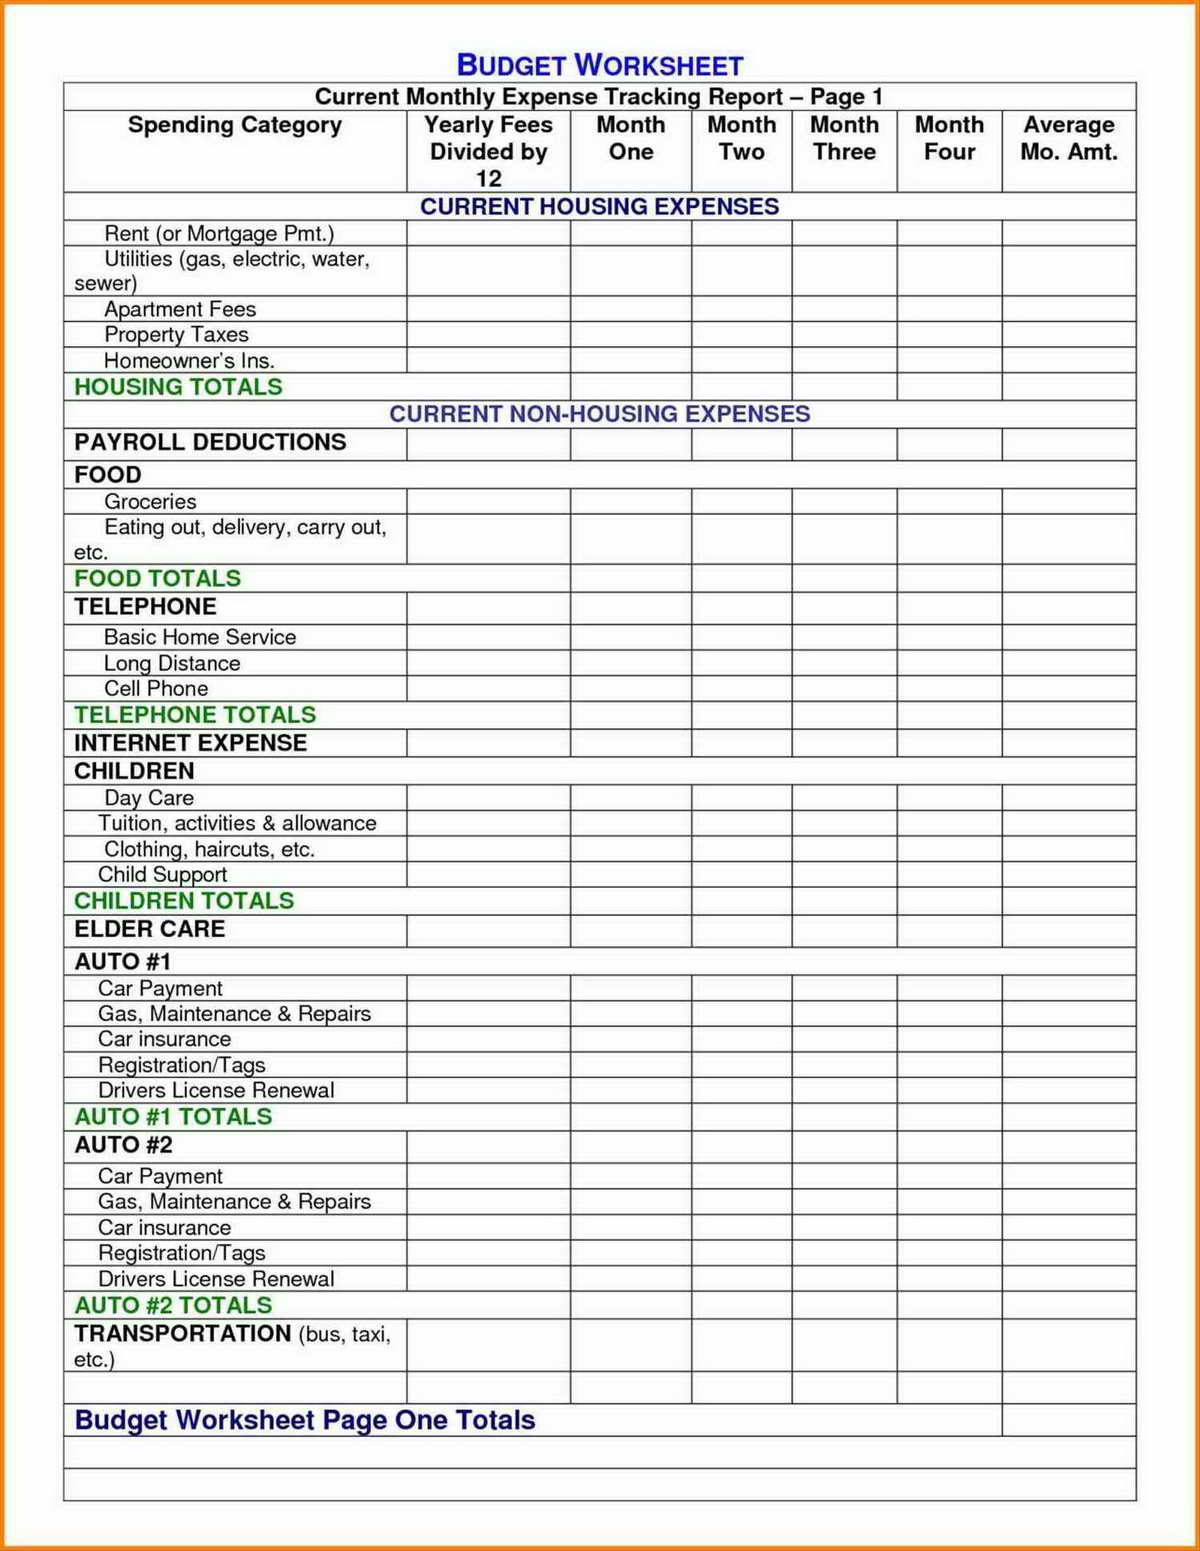 Business Expense Spreadsheet On Free Spreadsheet Blank Spreadsheet For Free Business Expense Spreadsheet